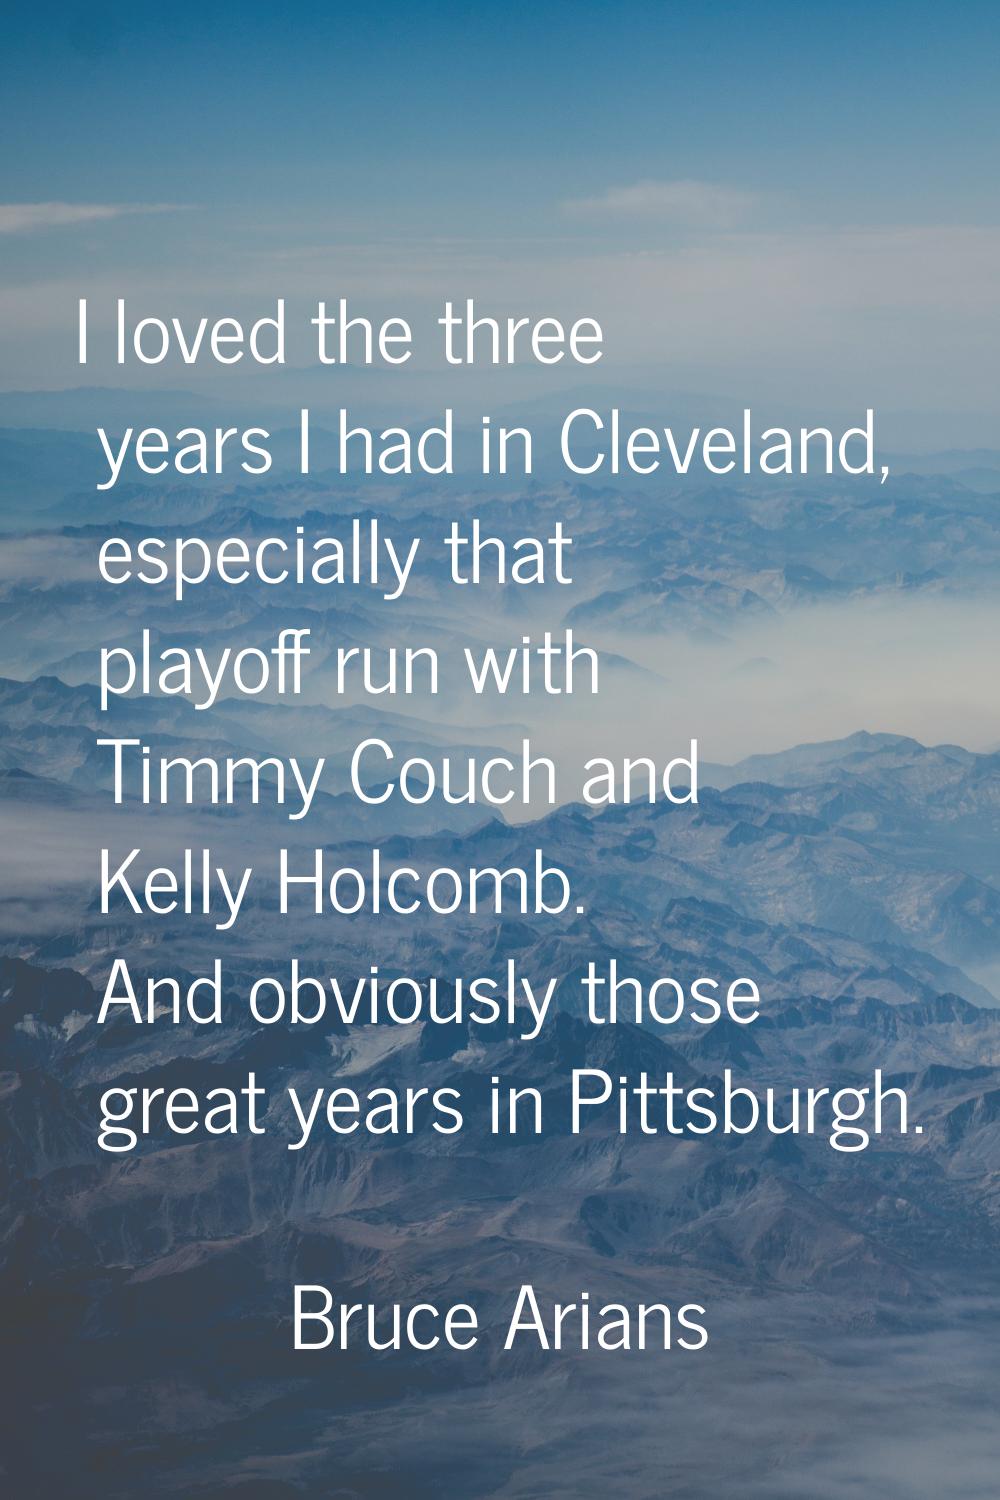 I loved the three years I had in Cleveland, especially that playoff run with Timmy Couch and Kelly 